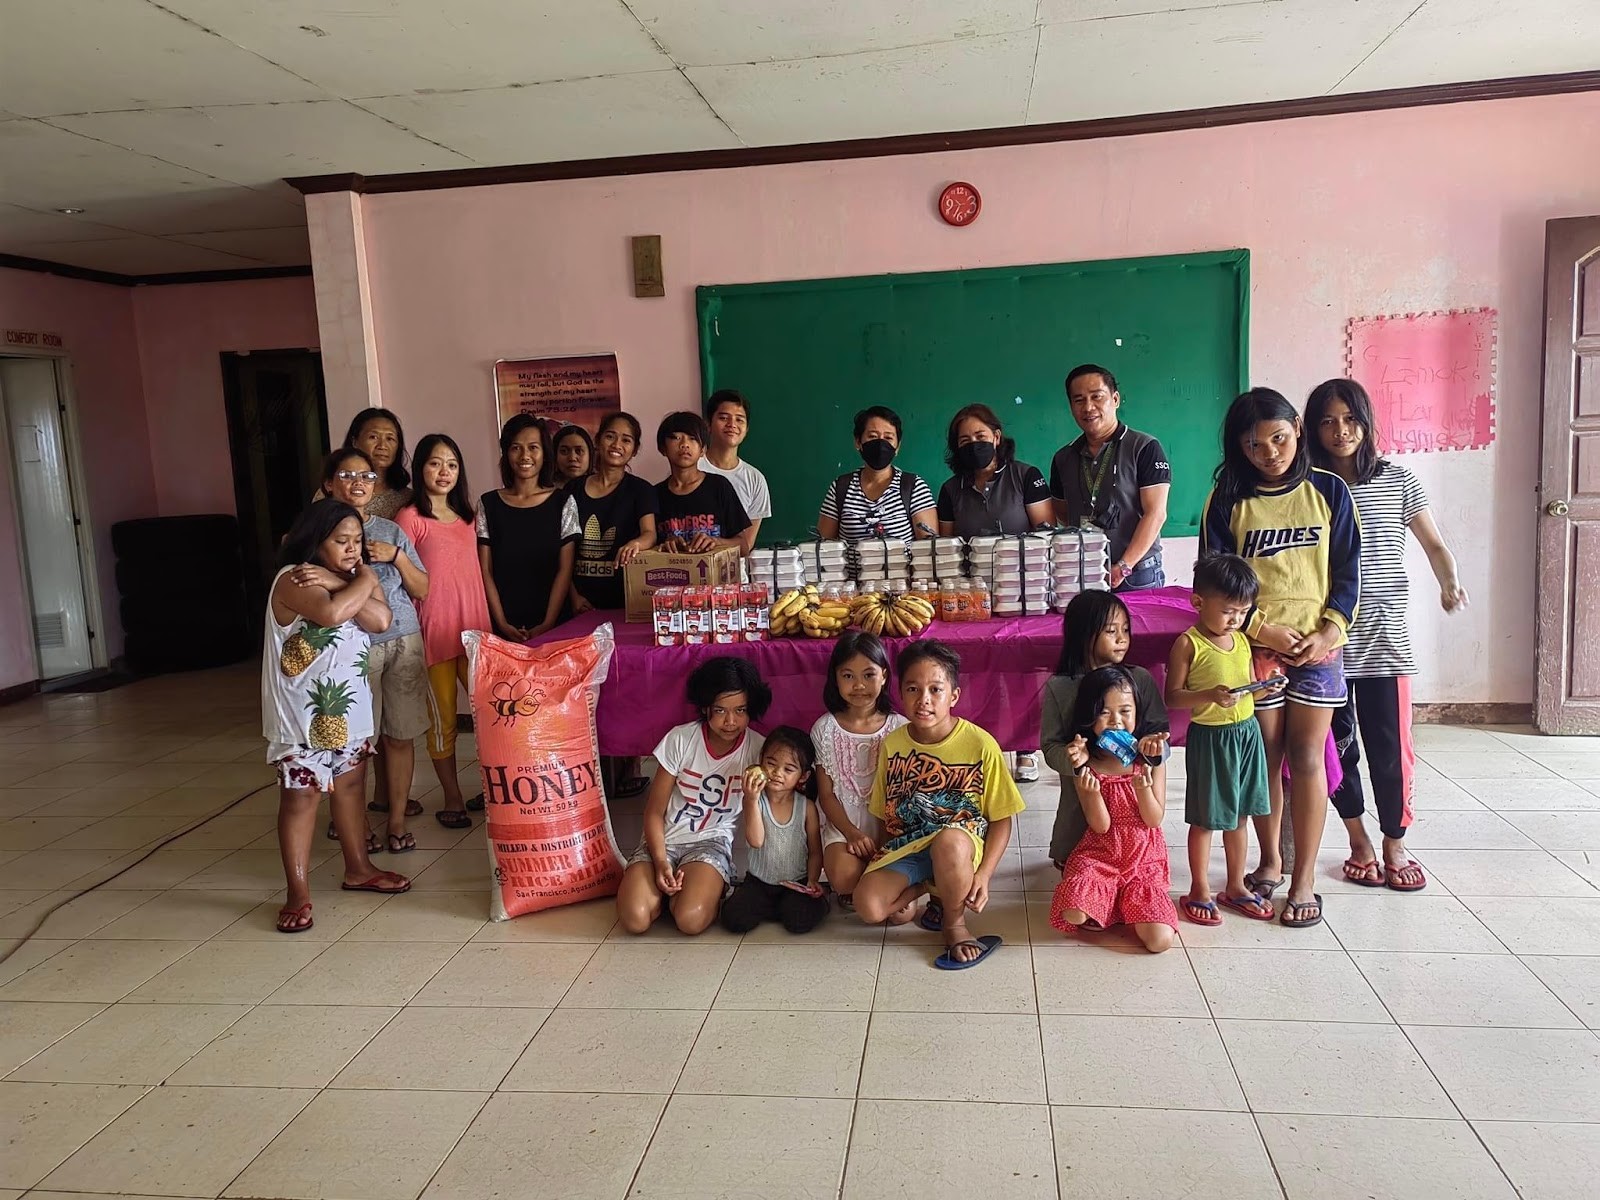 SSCT-MAINIT CAMPUS’ INITIATES DONATION DRIVE TO THE CBCH